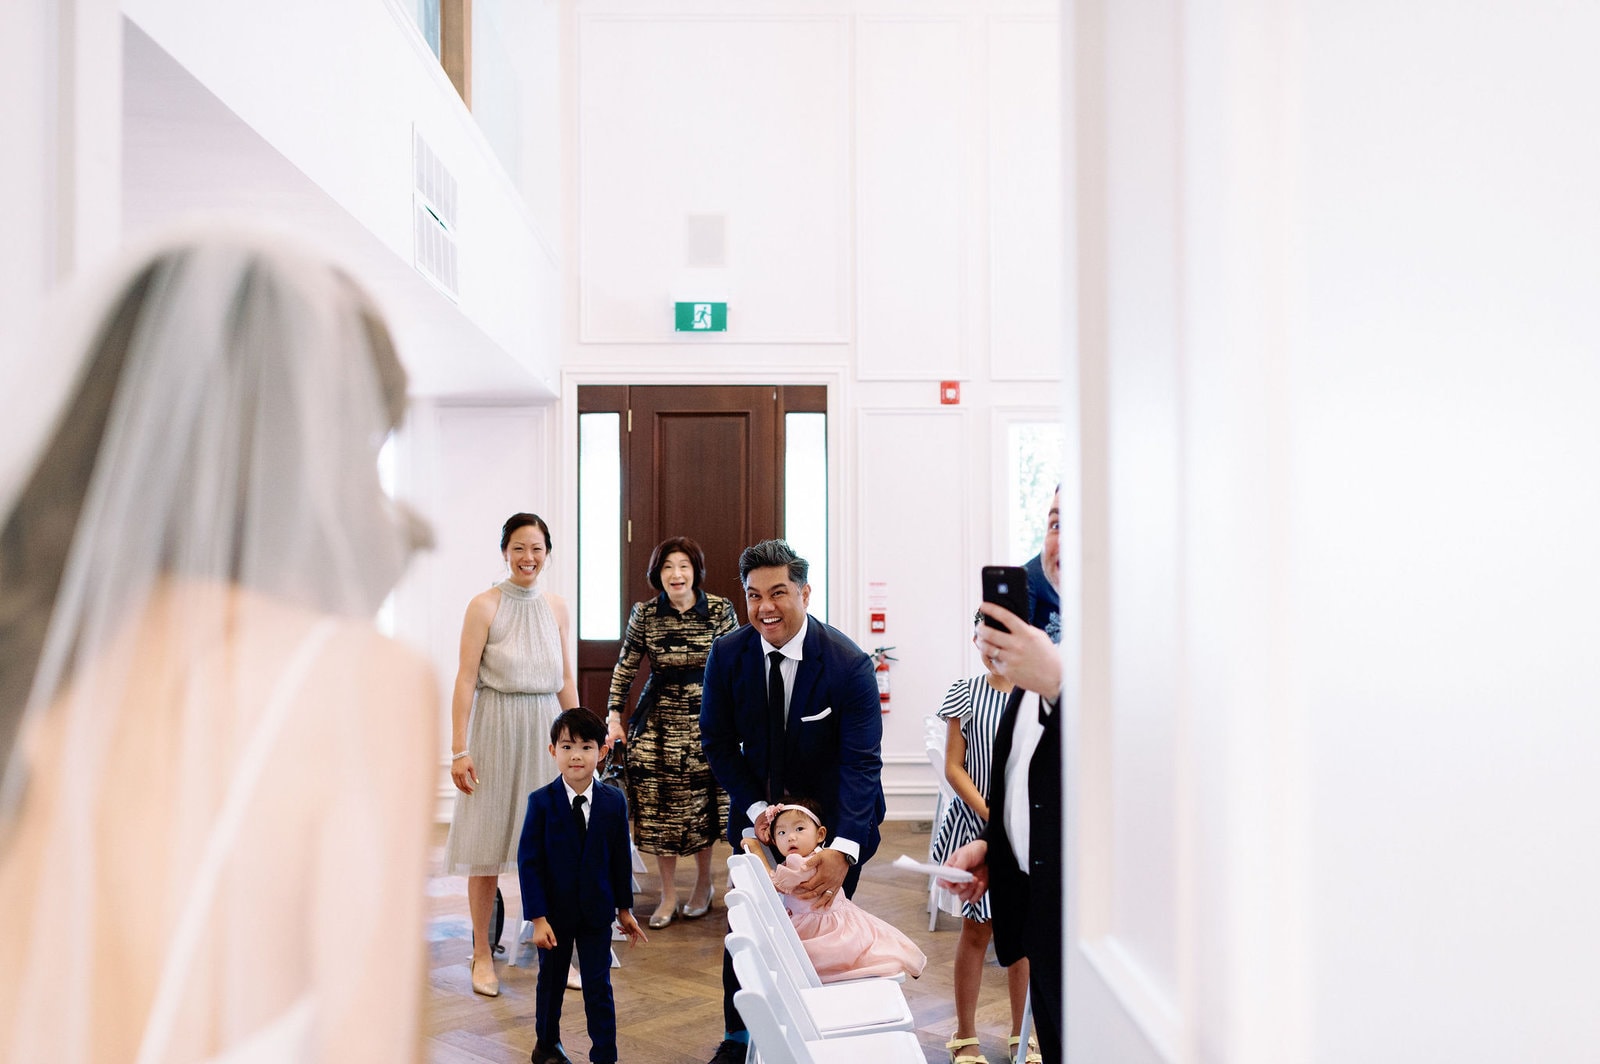 Couple Meets and Surprises Family on Wedding Day Happy Toronto at Arlington Estate Wedding Venue, Modern Romantic Summer Intimate Elopement Jacqueline James Photography